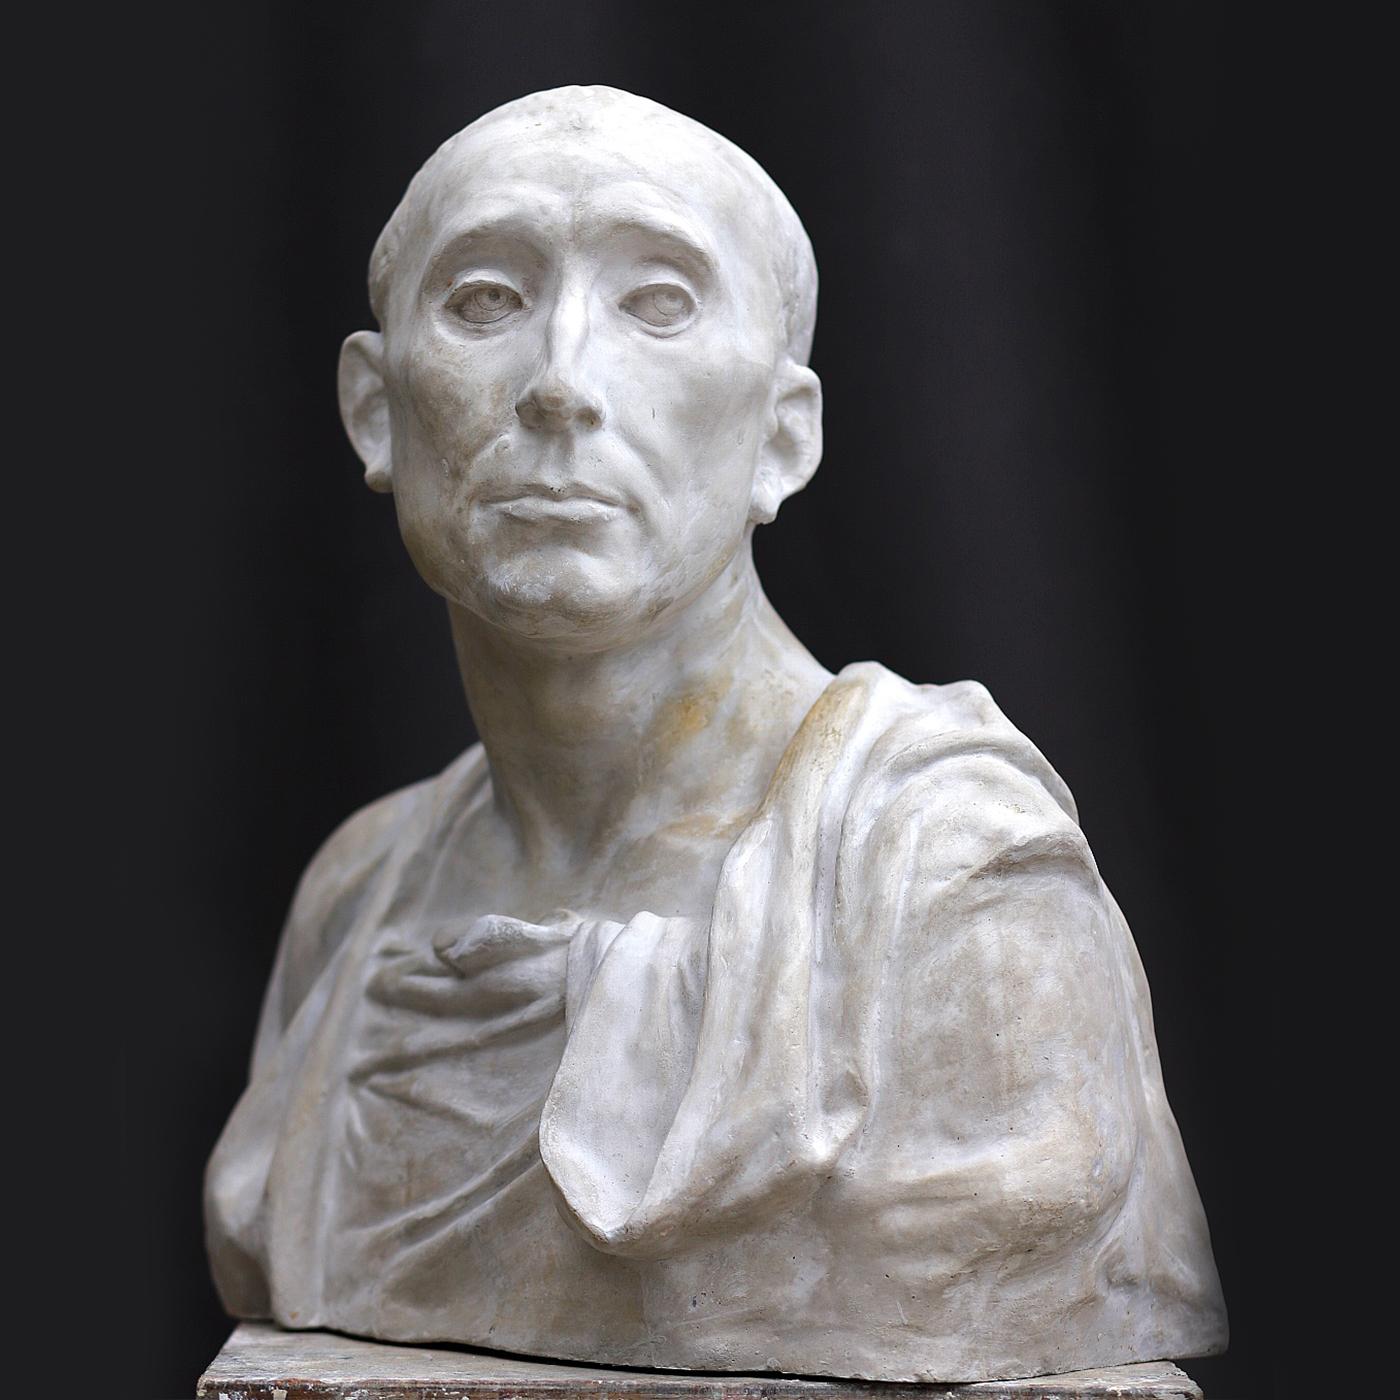 A stupendous reproduction of the Niccolò da Uzzano Bust by Donatello (1432) preserved at the Bargello Museum of Florence, this extraordinary oeuvre is one of the most ancient busts of the Renaissance period. Dynamic and utterly realistic, it will